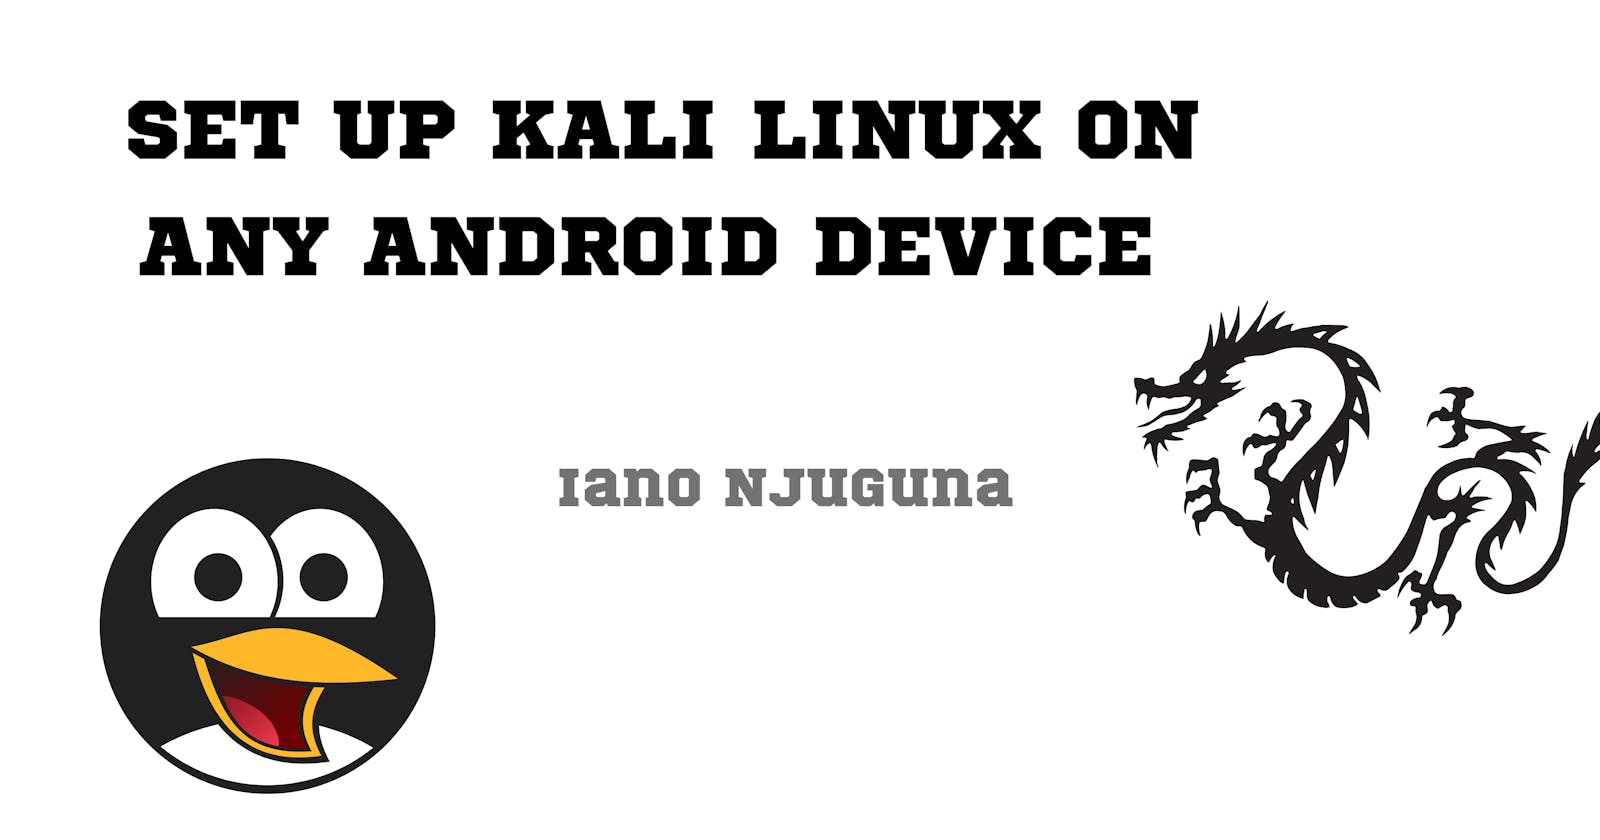 Kali Linux on Android Devices